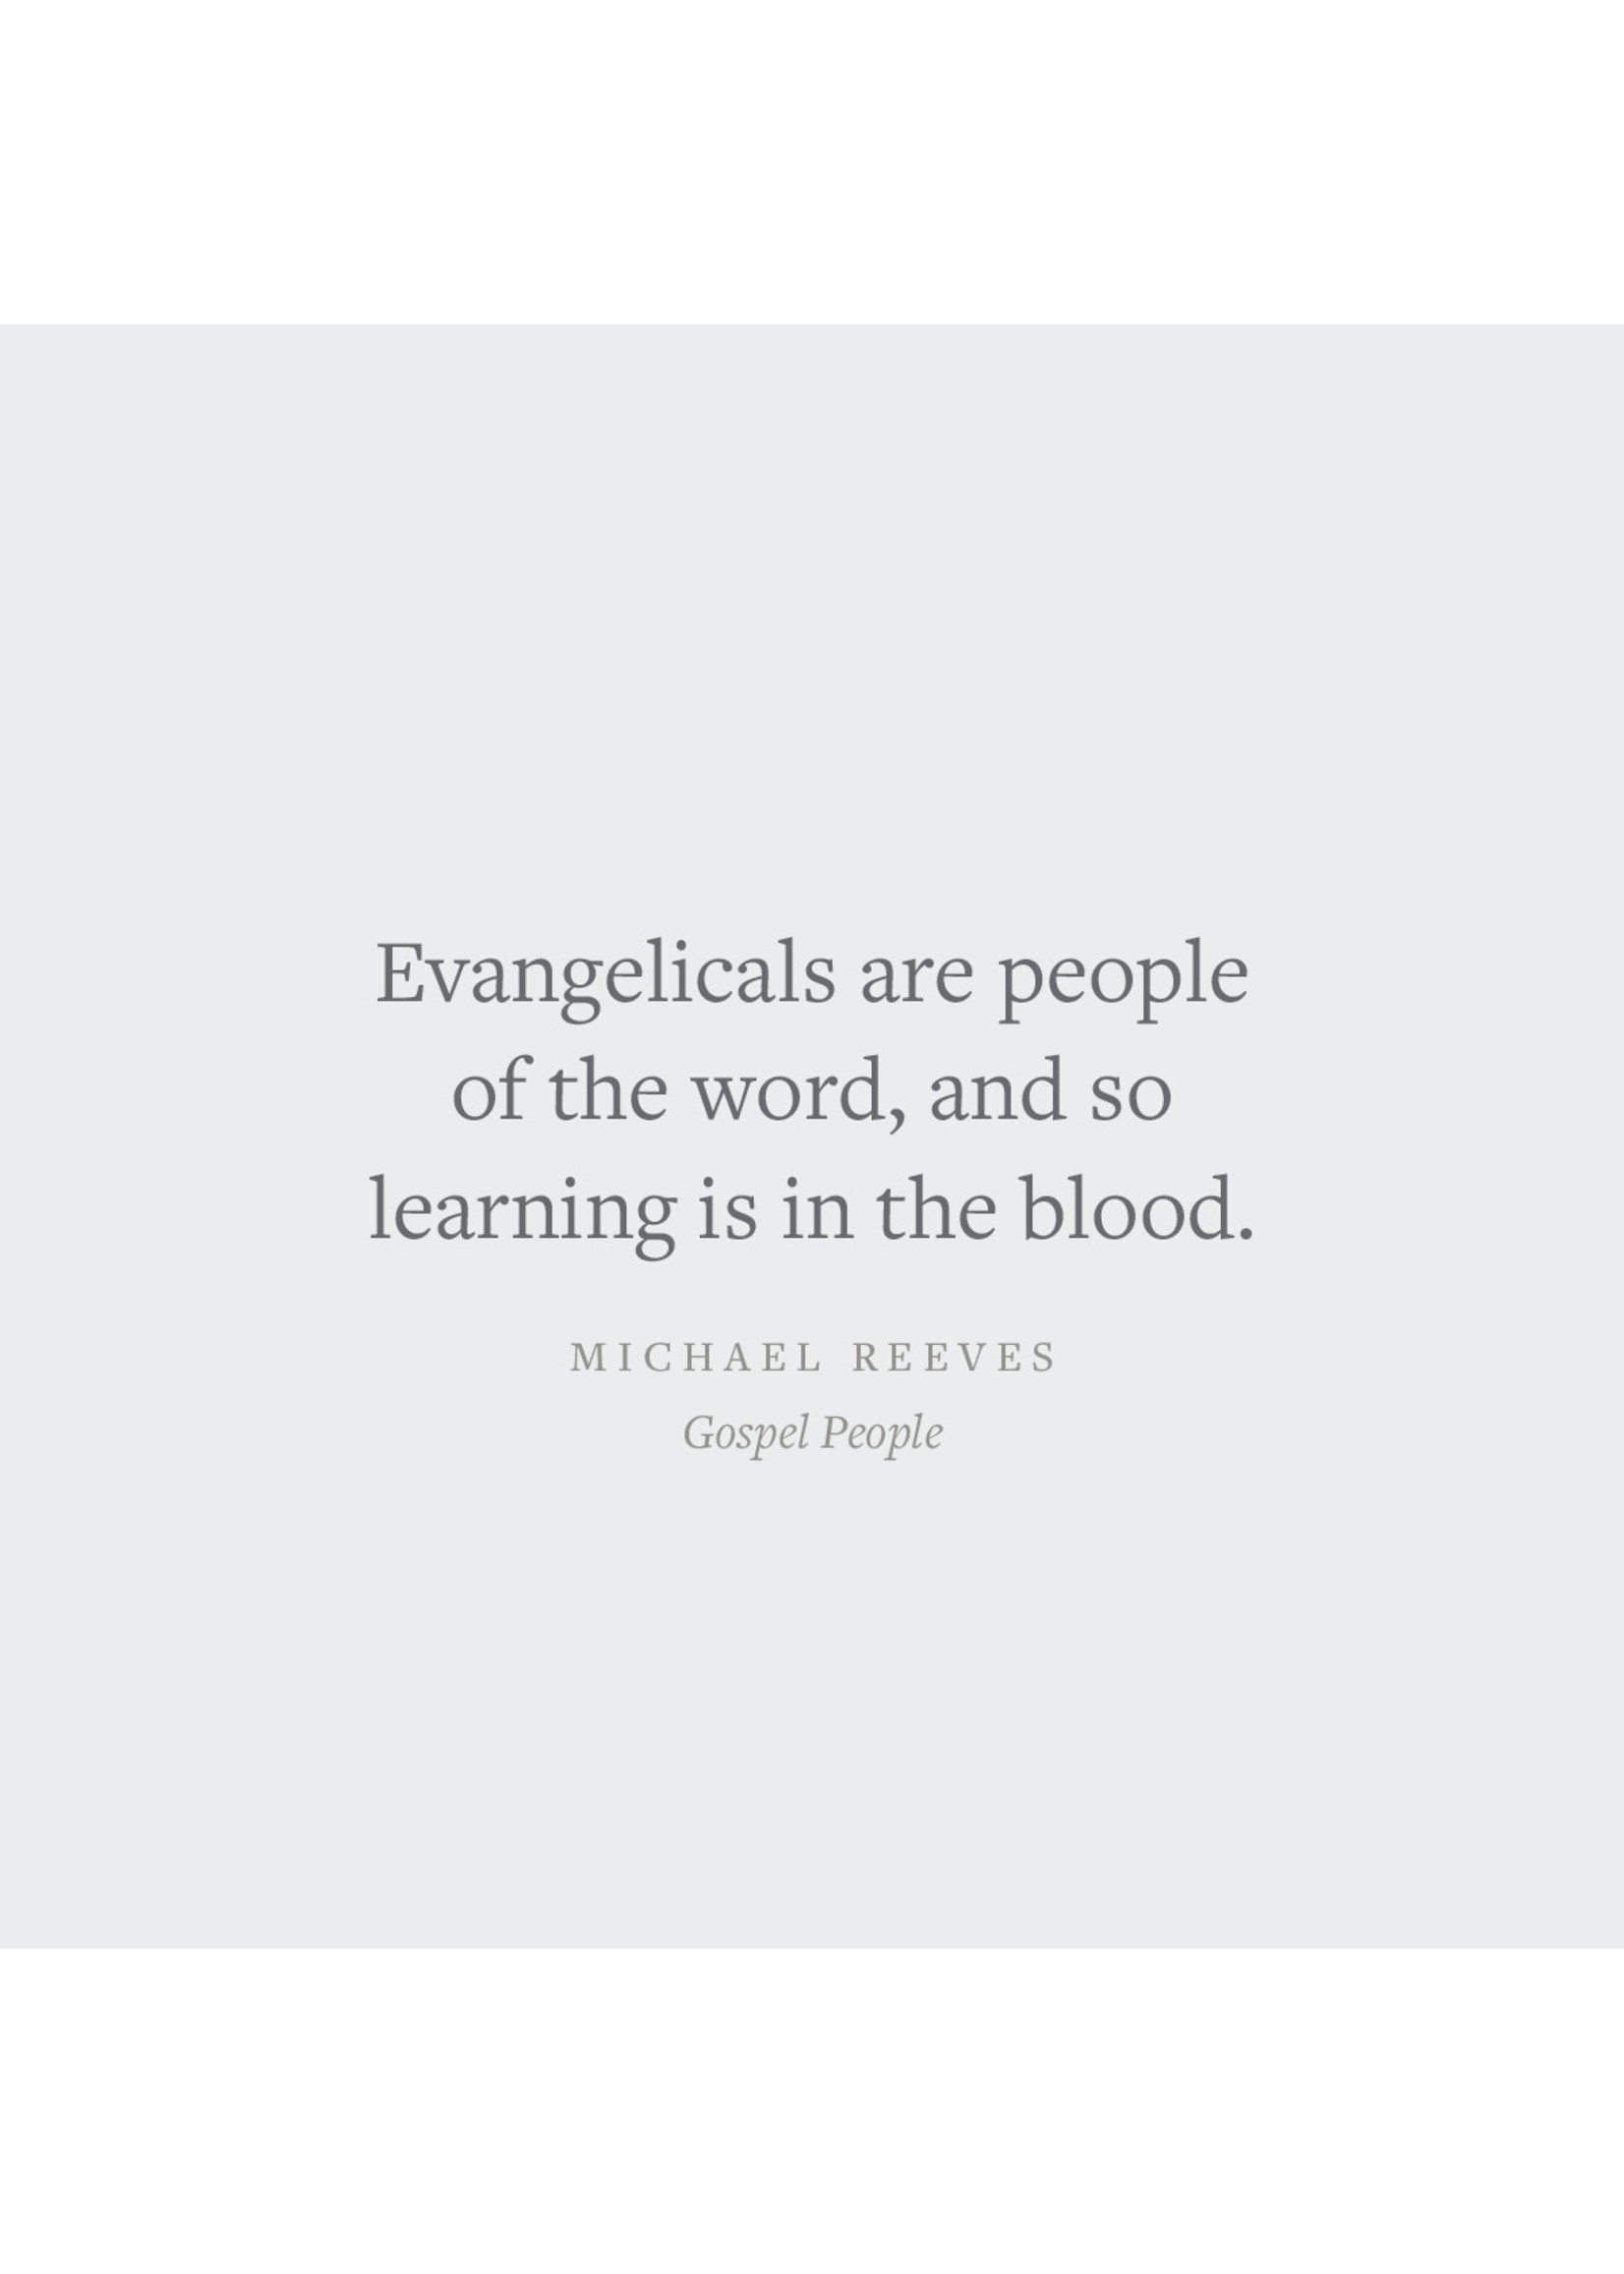 Reeves, Michael Gospel People: A Call for Evangelical Integrity